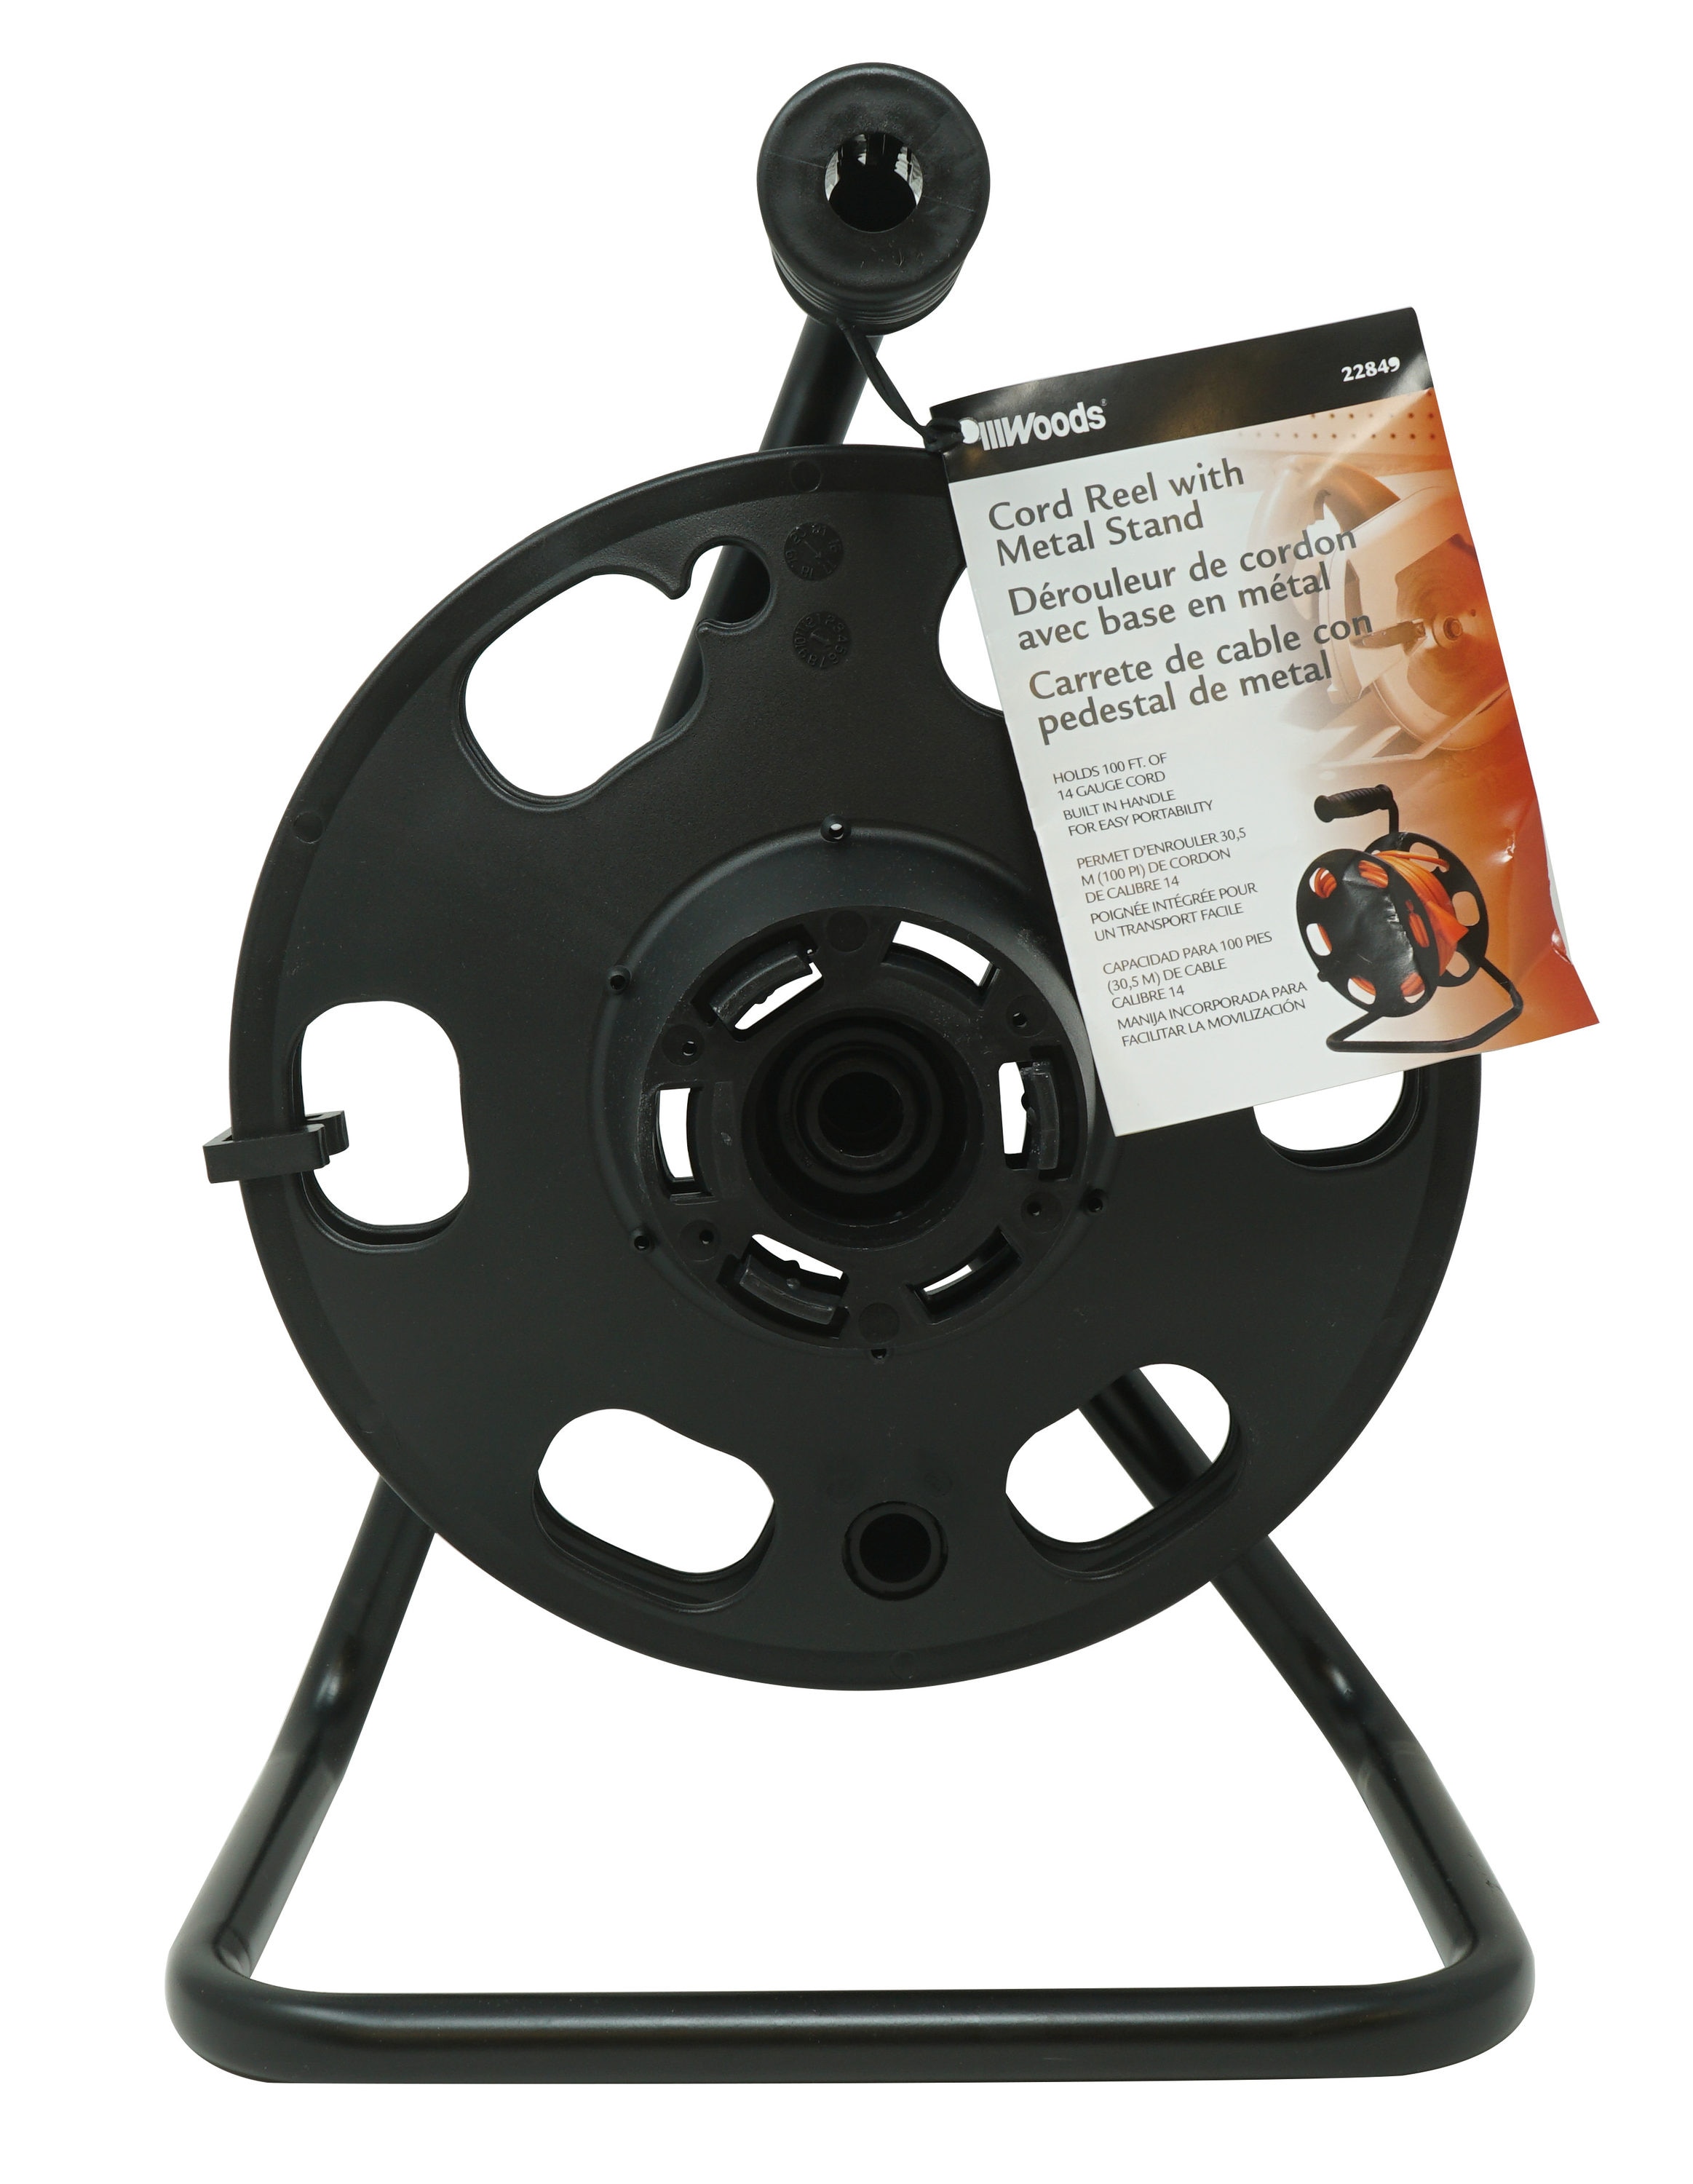 Link2Home Cord Reel Extension Cord Accessories at